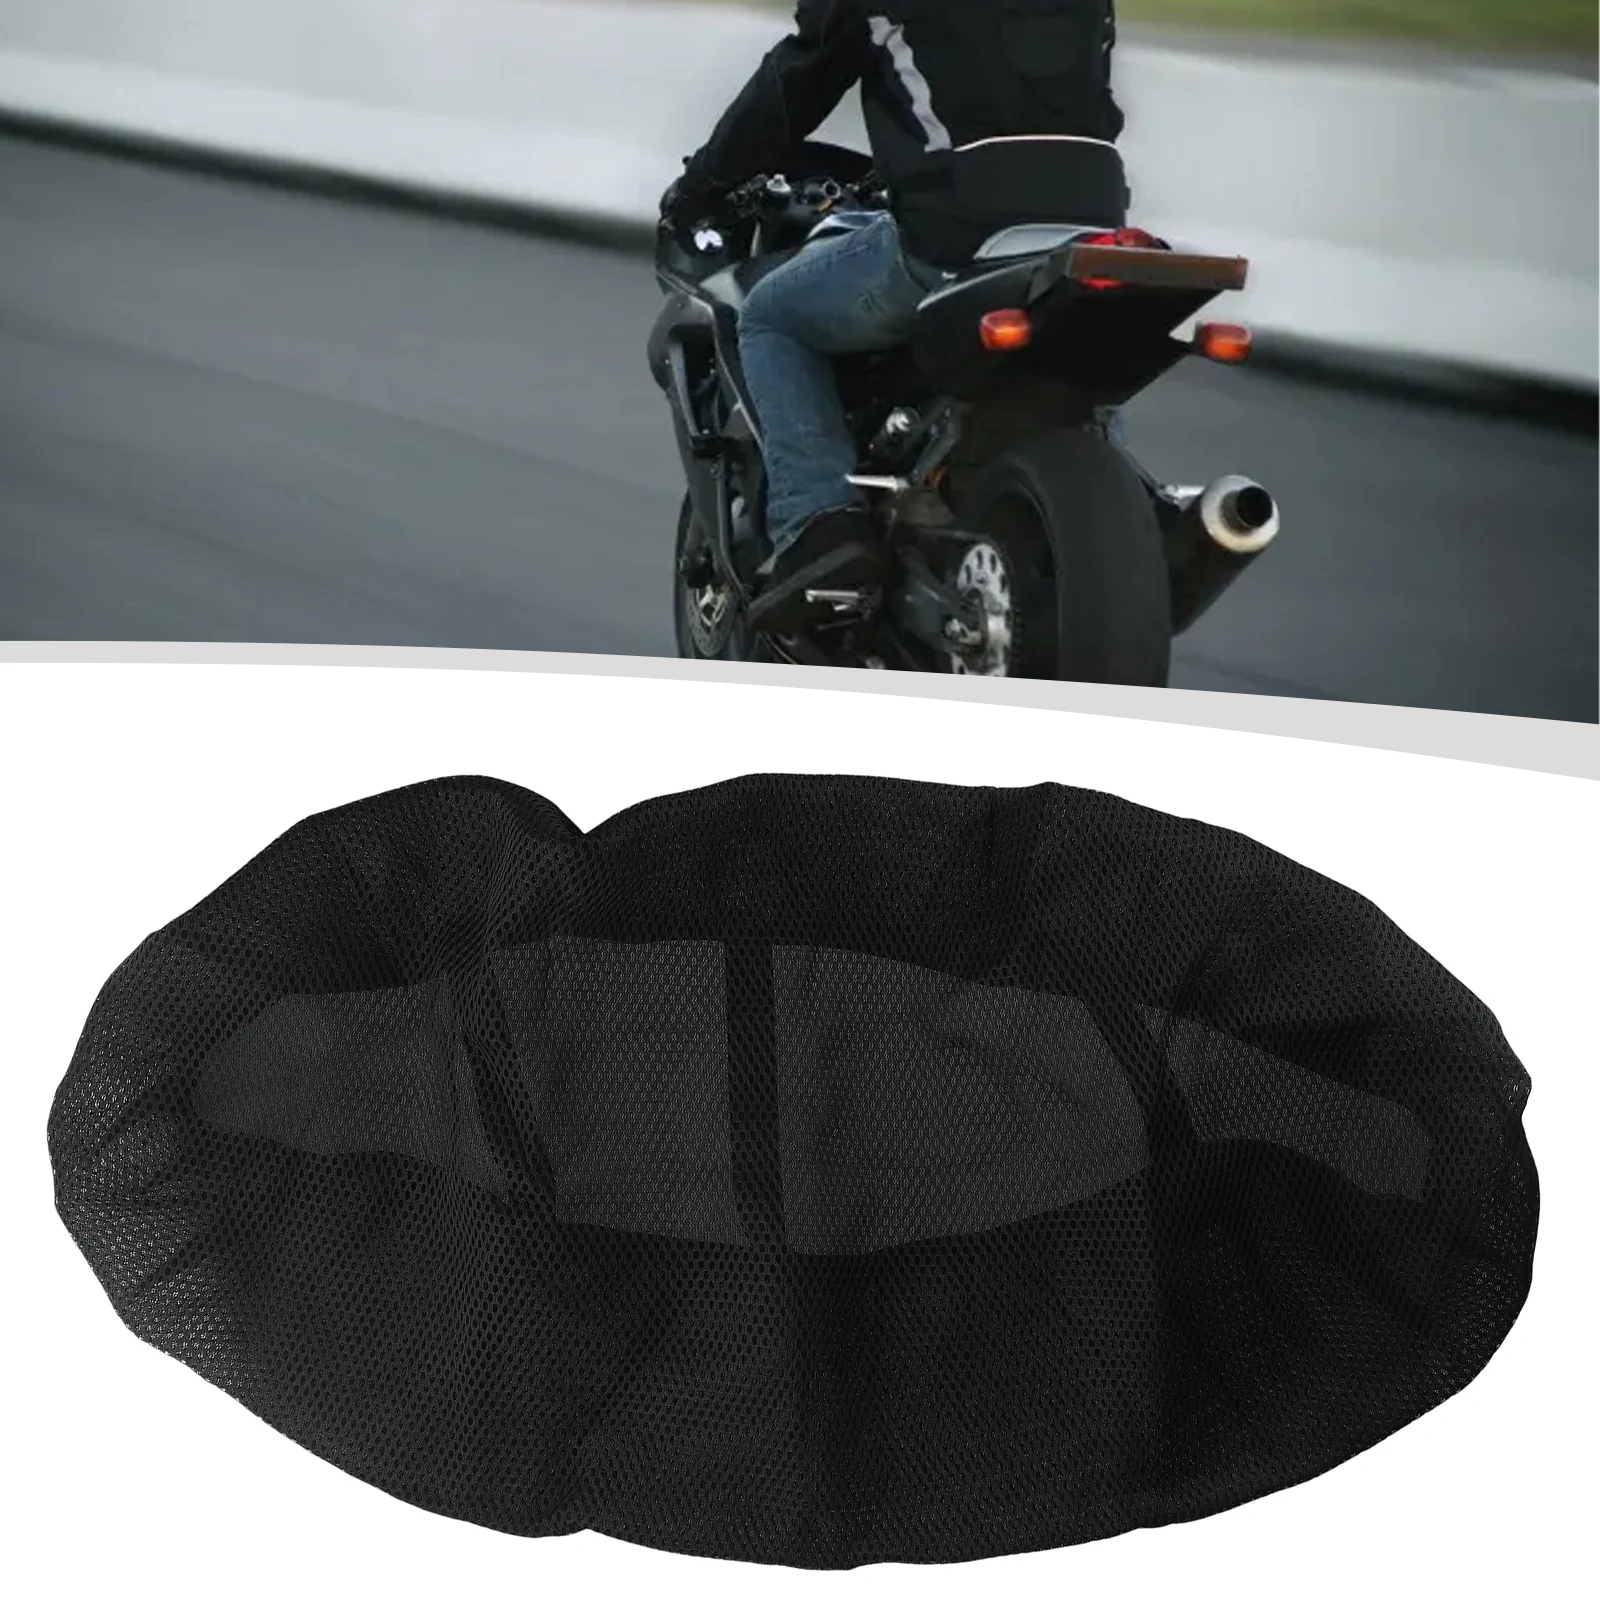 Motorcycle Cushion Seat Cover Motorcycle Mildew-proof Moisture-proof Motorcycle Pad 85*60CM Anti-Slip Brand New camping folding mat 4 zone xpe foam pad moisture proof elasticity cushion hiking picnic anti dirty seat outdoor tools portable